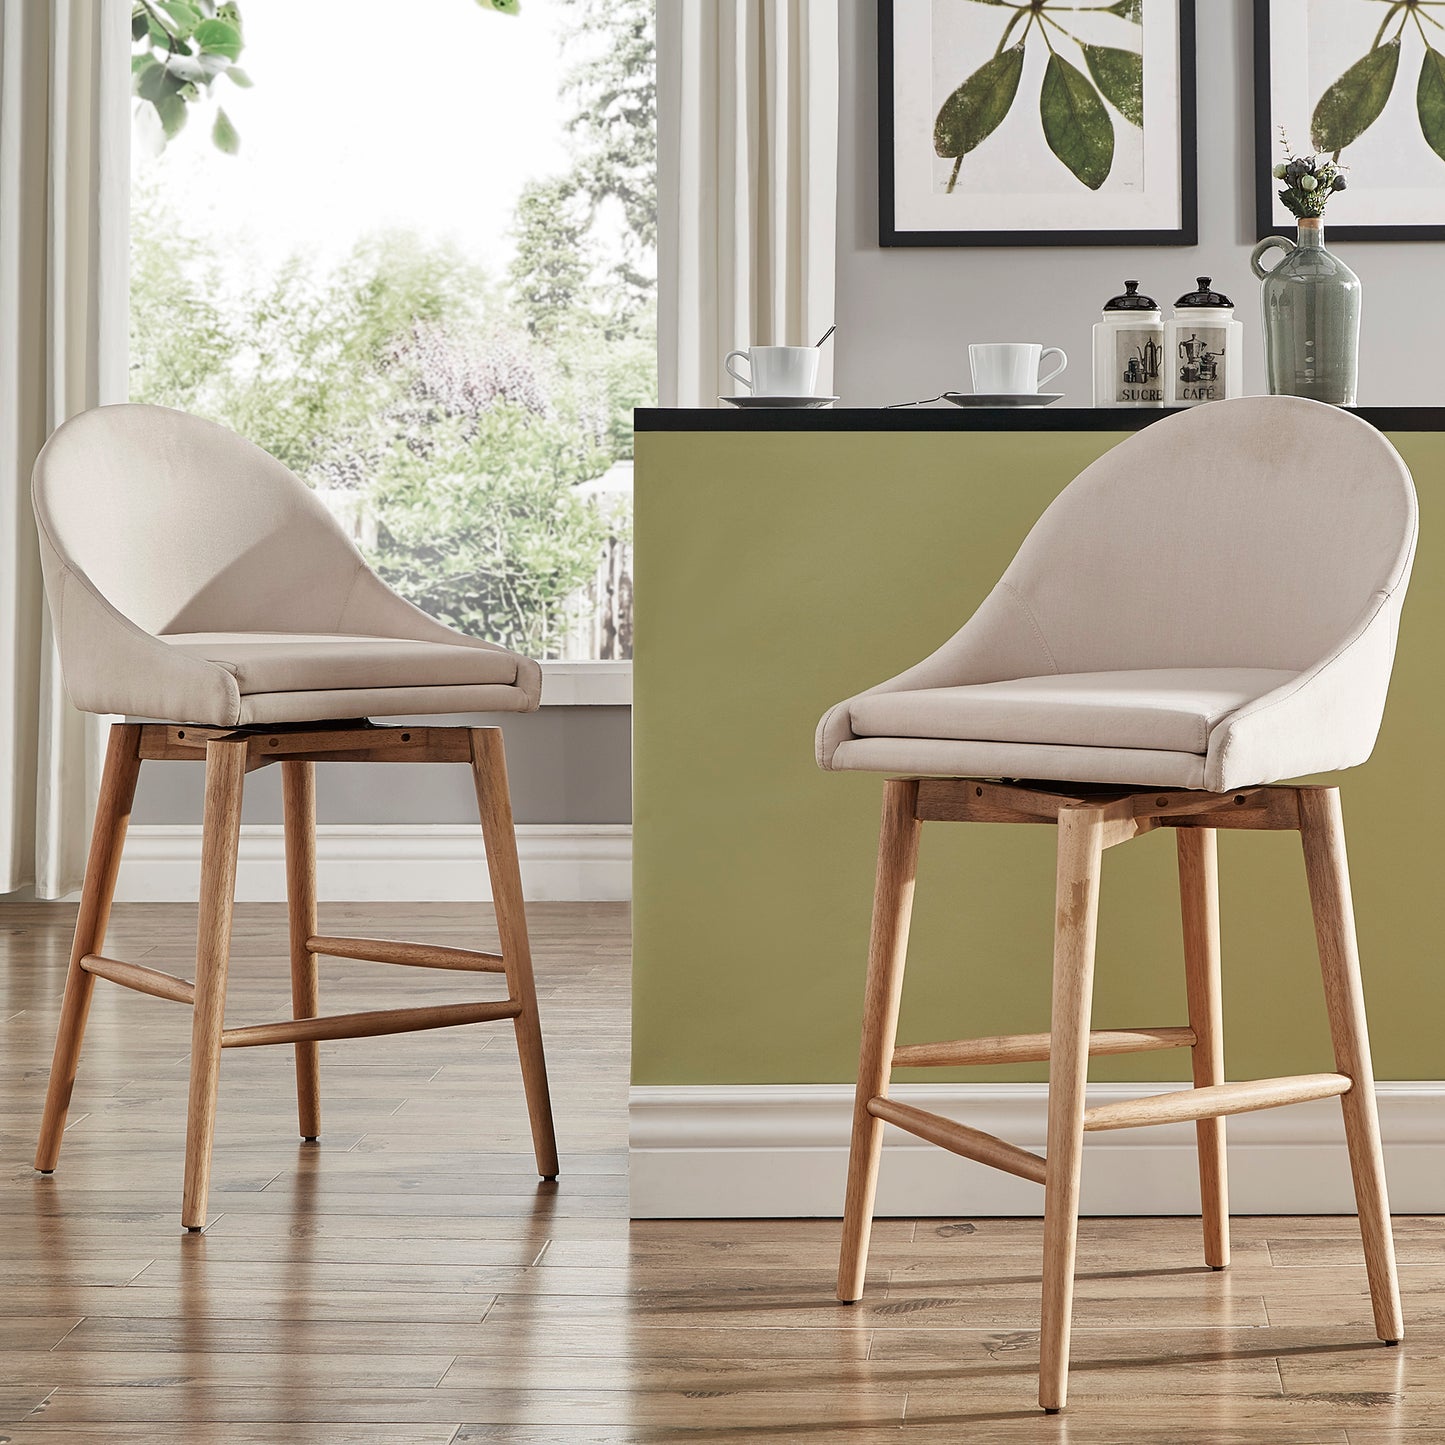 Mid-Century Wood Counter Height Stools (Set of 2) - Beige Linen, Counter Height, With Swivel